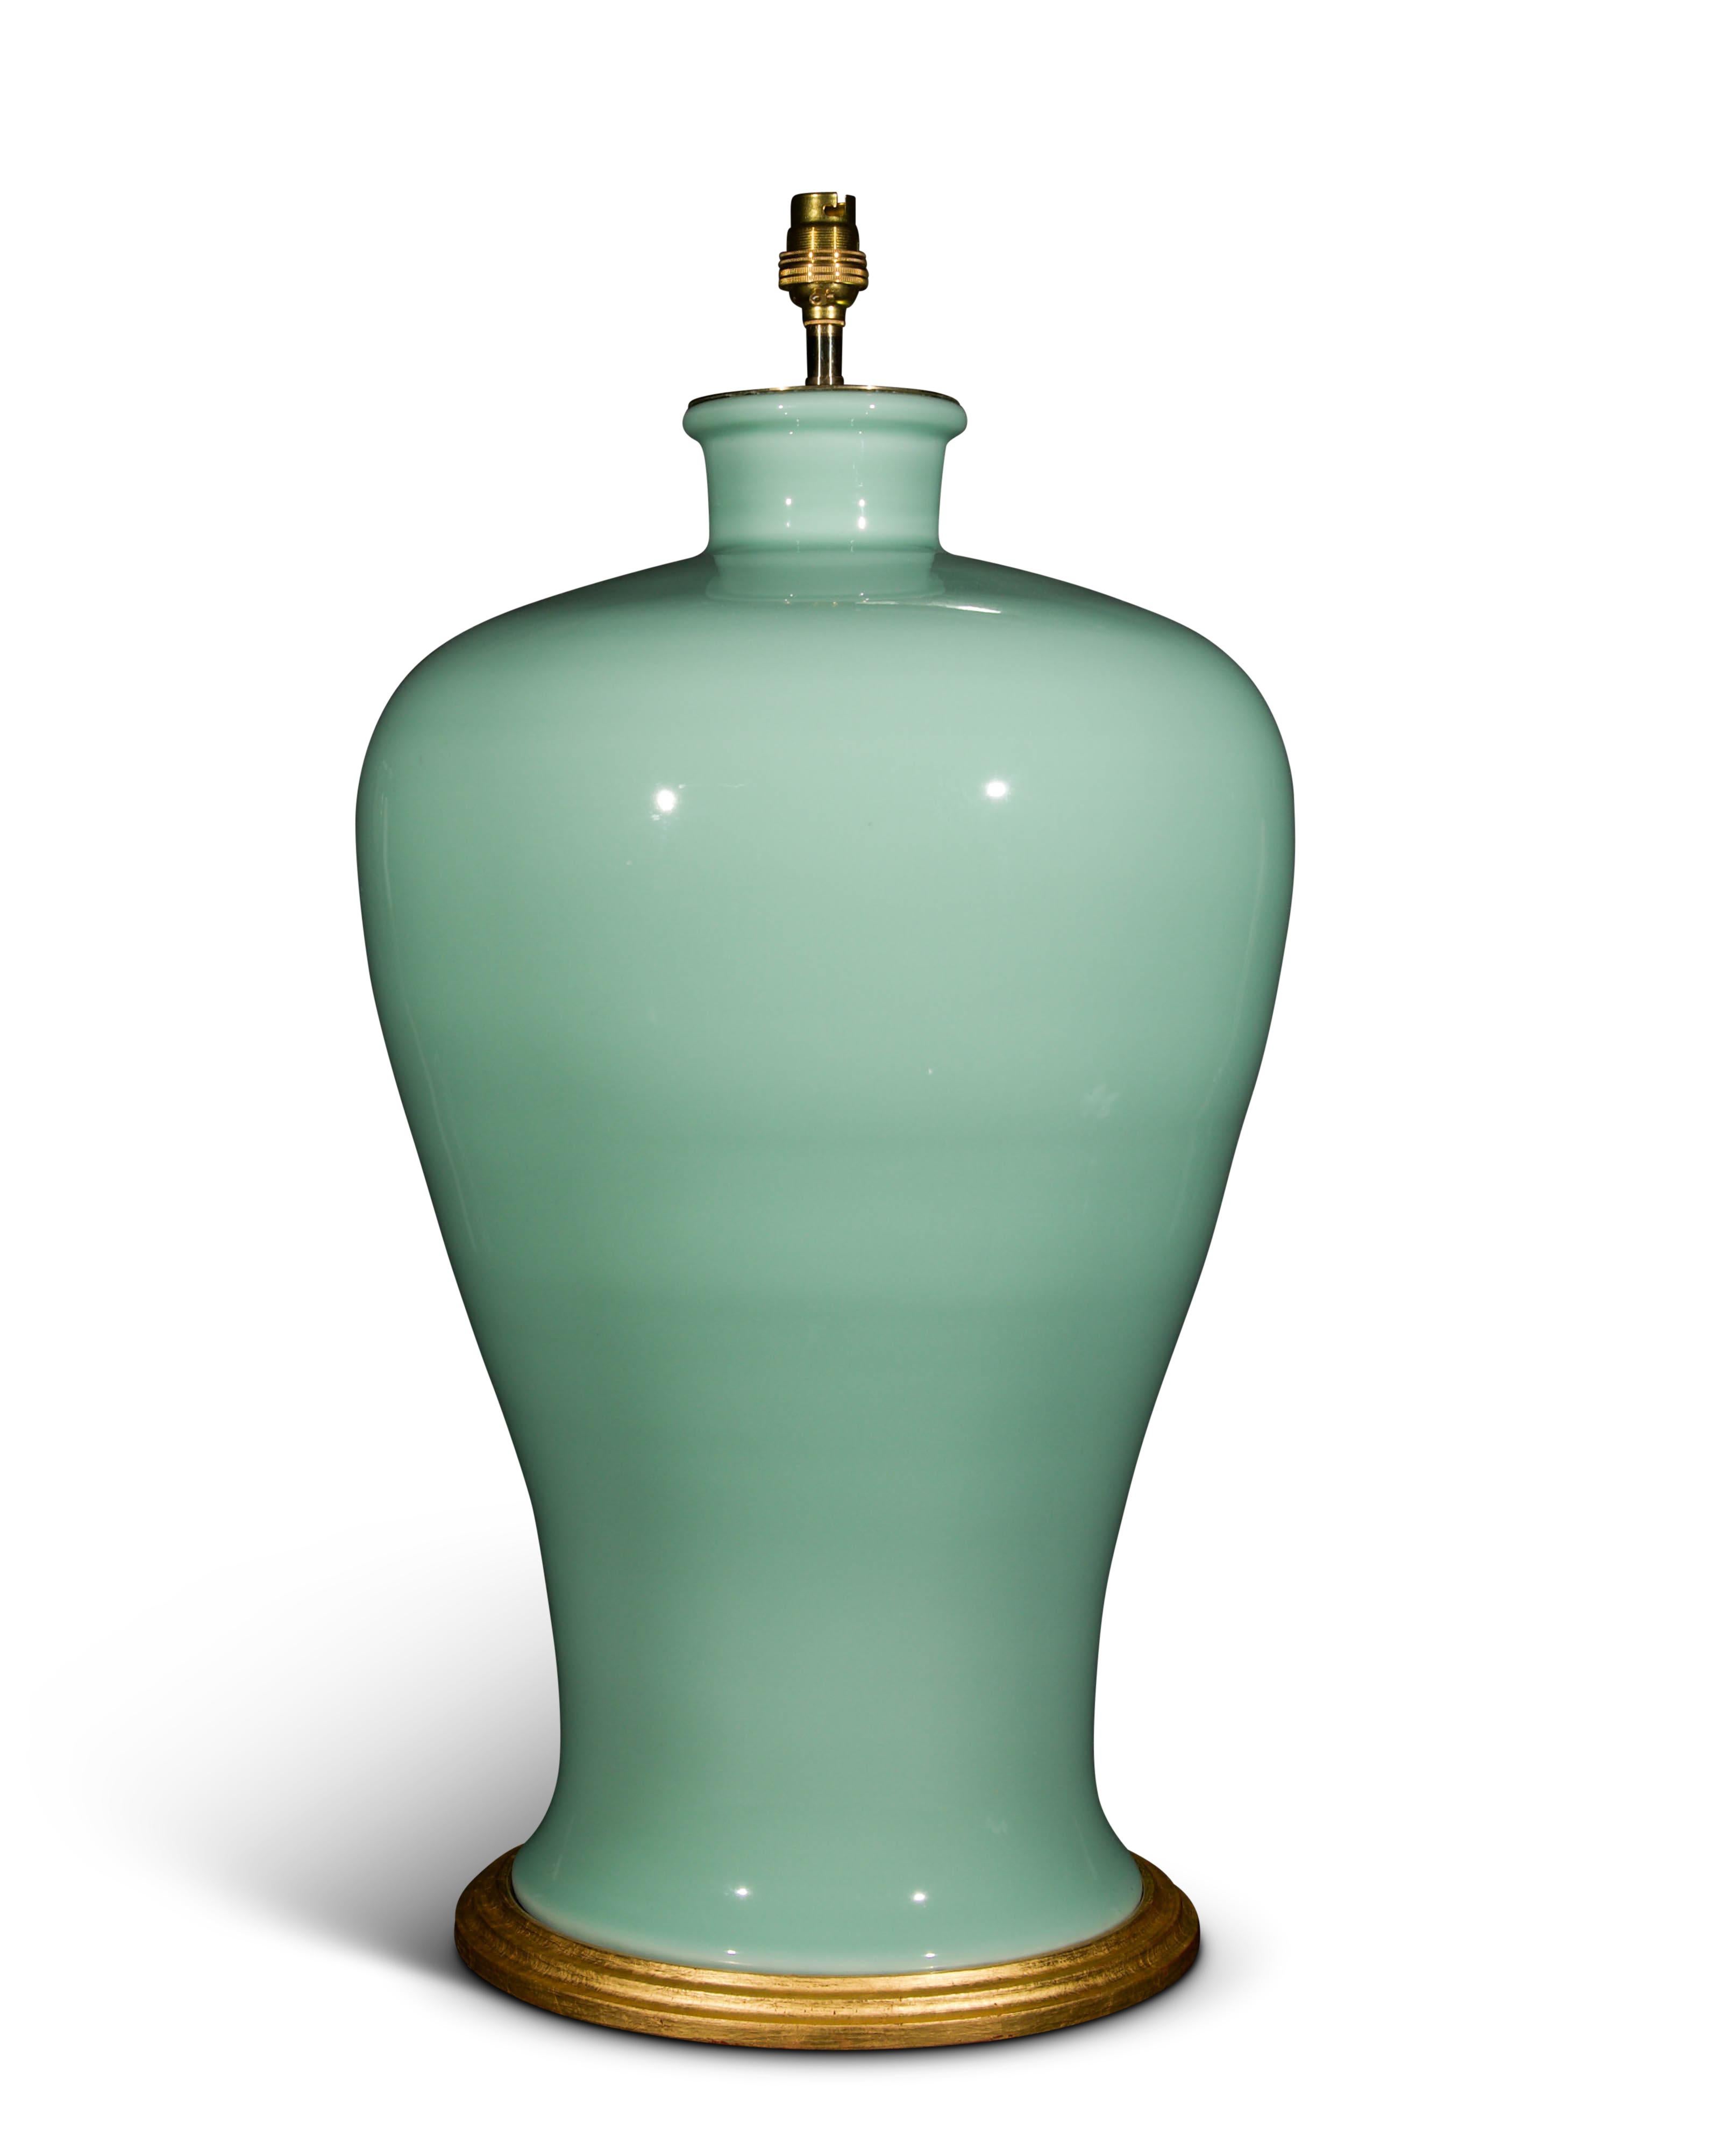 A fine large Chinese porcelain celadon glazed baluster vase, now mounted as a lamp with hand gilded turned base.

height of vase: 21 1/4 in (54 cm) including giltwood base, excluding electrical fitment and lampshade.

All of our vases can be